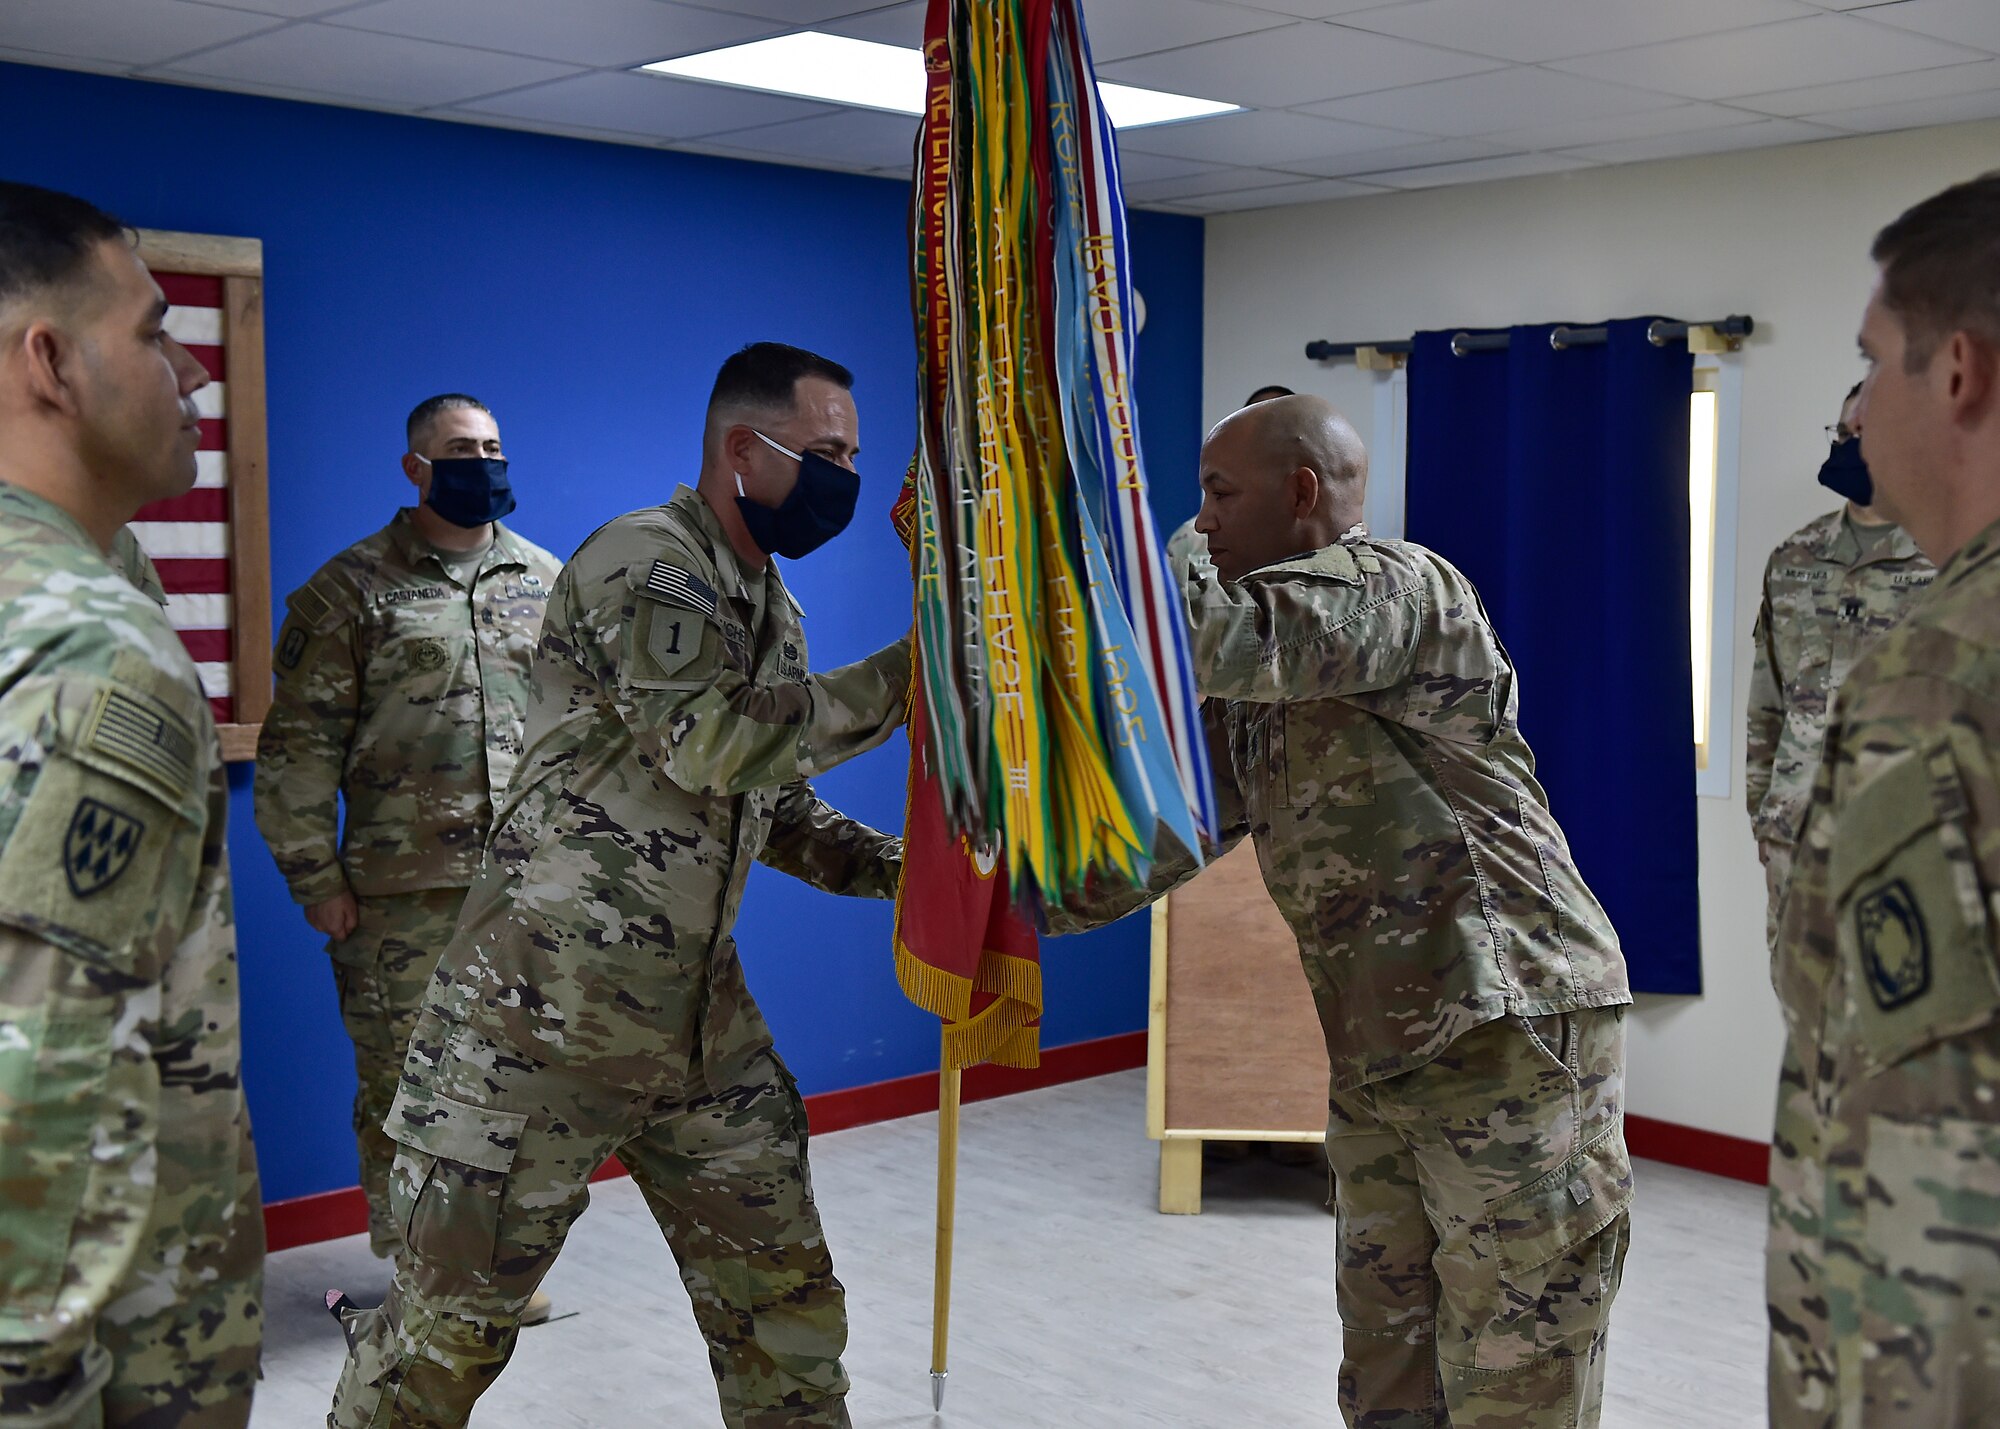 U.S. Army CSM Seagram Porter, outgoing command sergeant major, relinquishes responsibility of the 4-5 Air Defense Artillery Regiment to CSM Tomas Barrios during a Change of Responsibility Ceremony at Prince Sultan Air Base, Kingdom of Saudi Arabia.